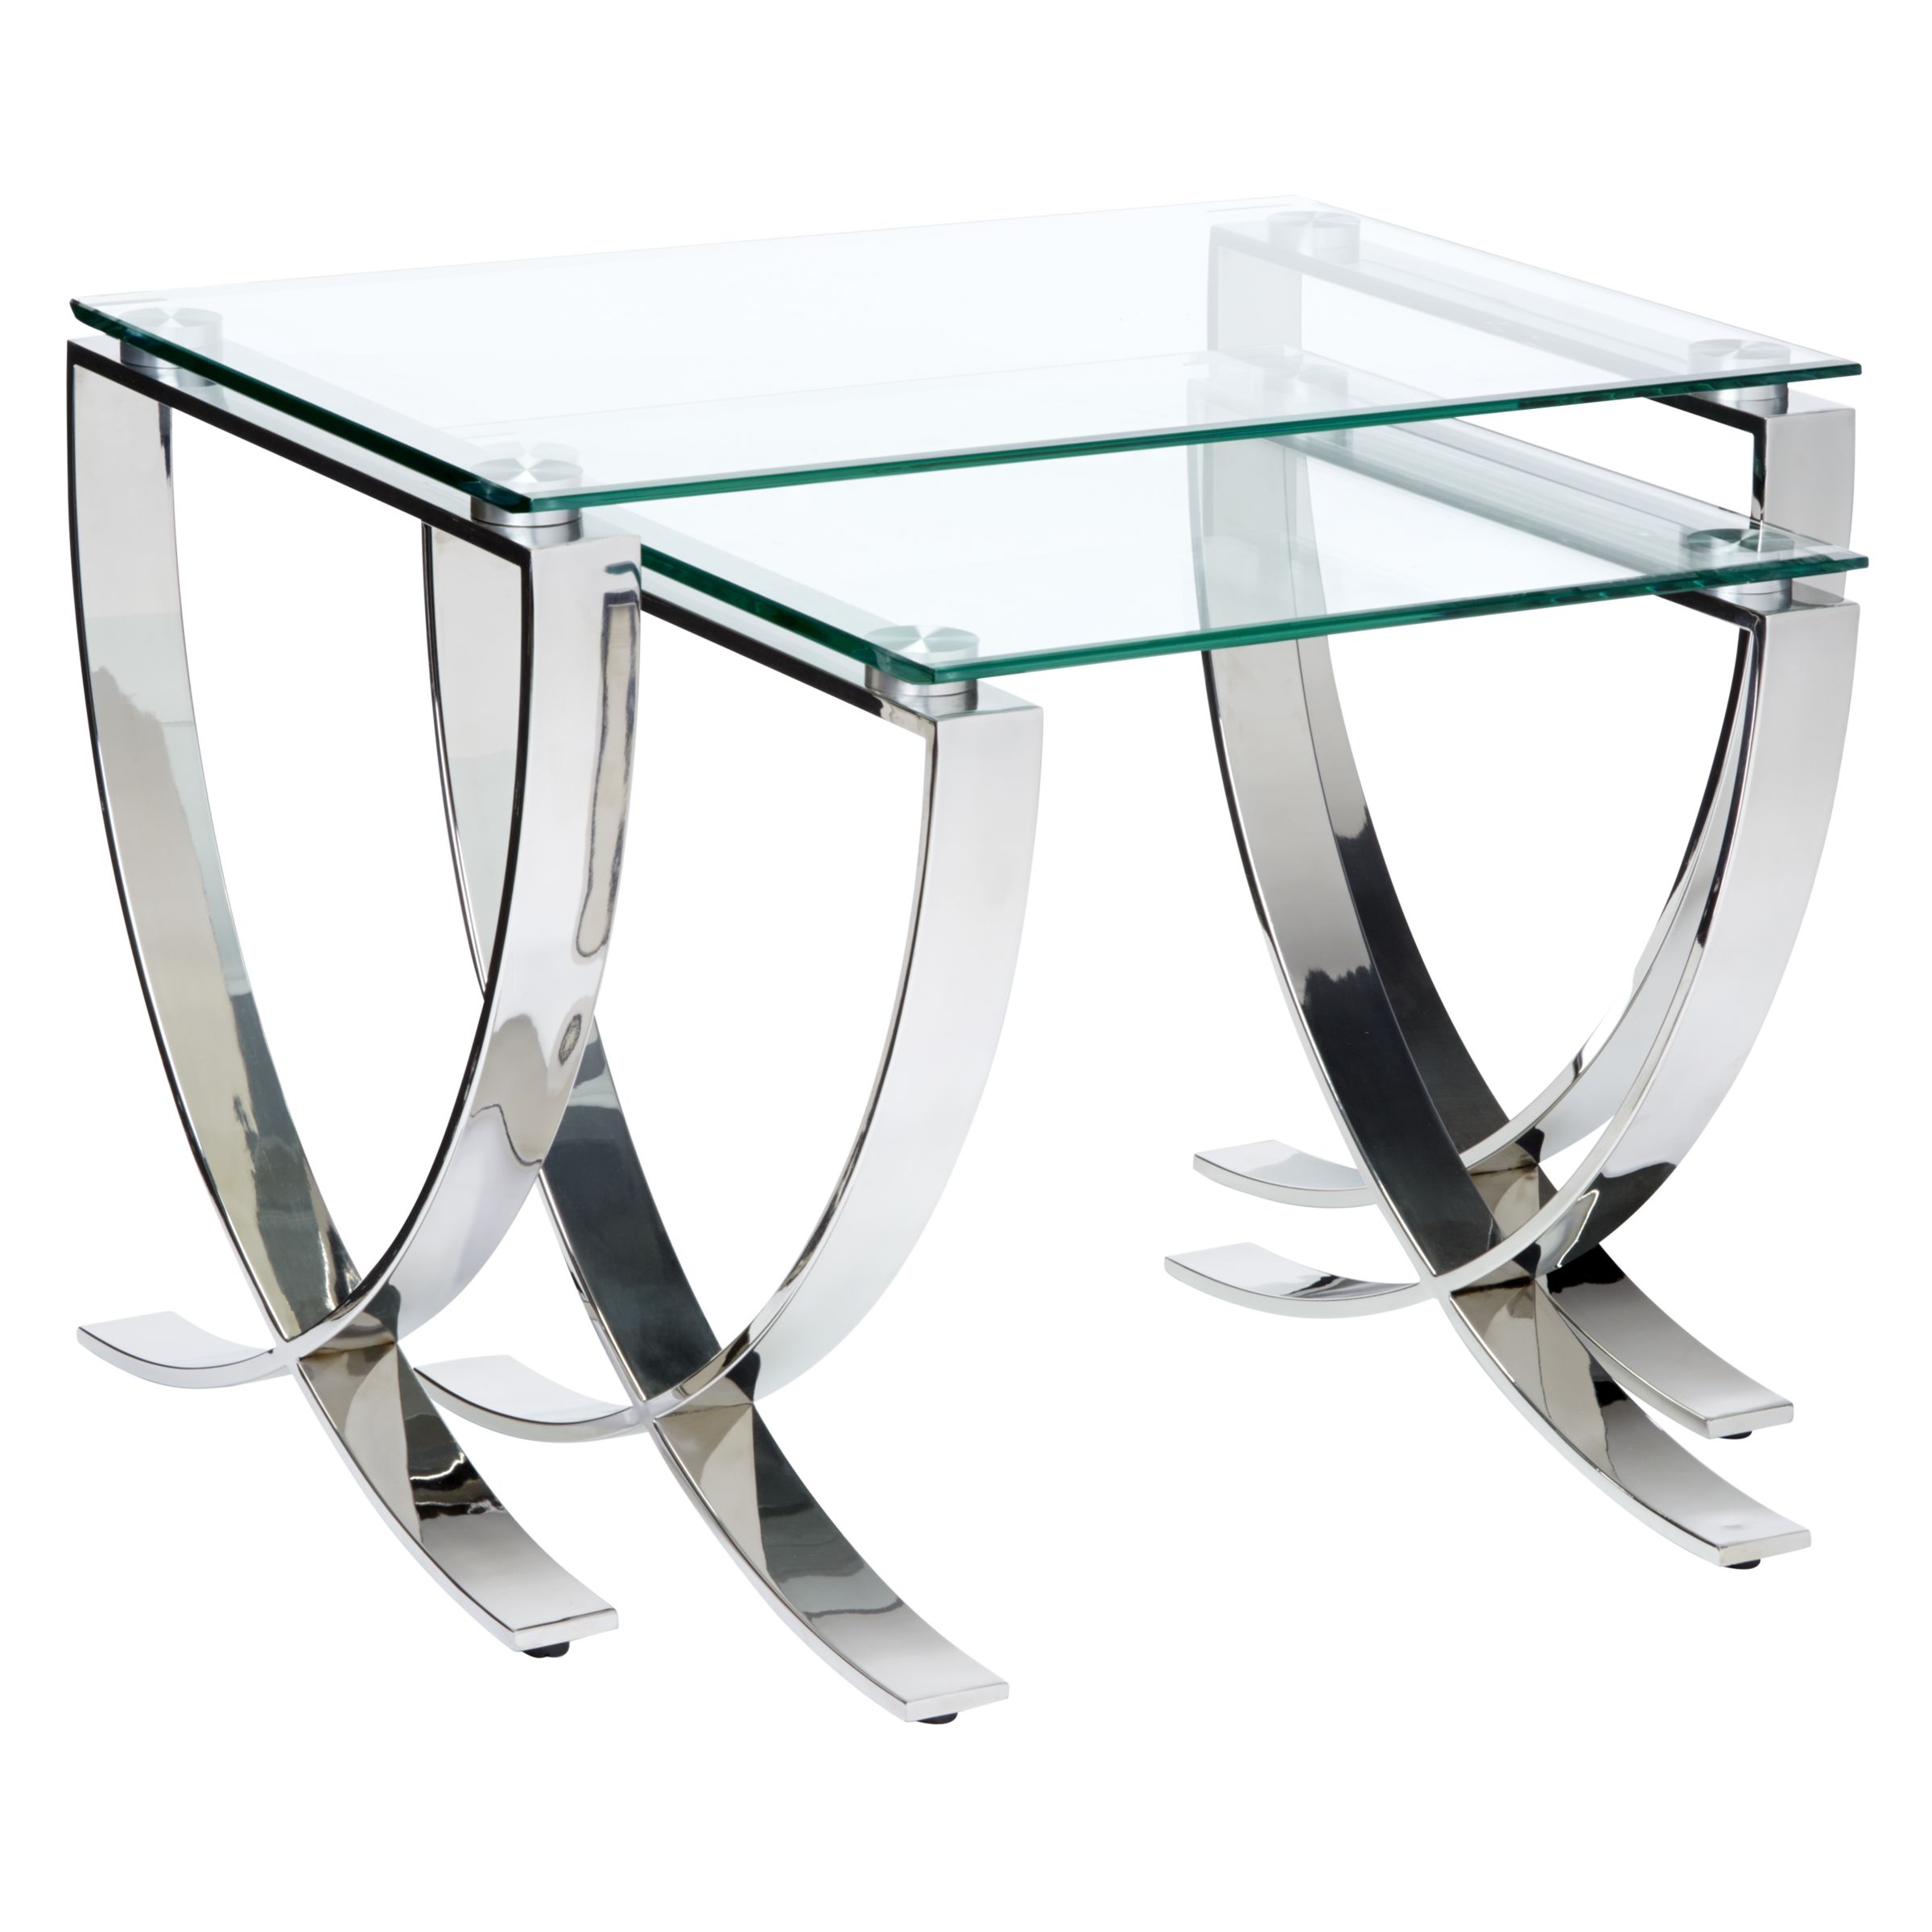 Photo of John lewis moritz nest of 2 tables clear/polished steel